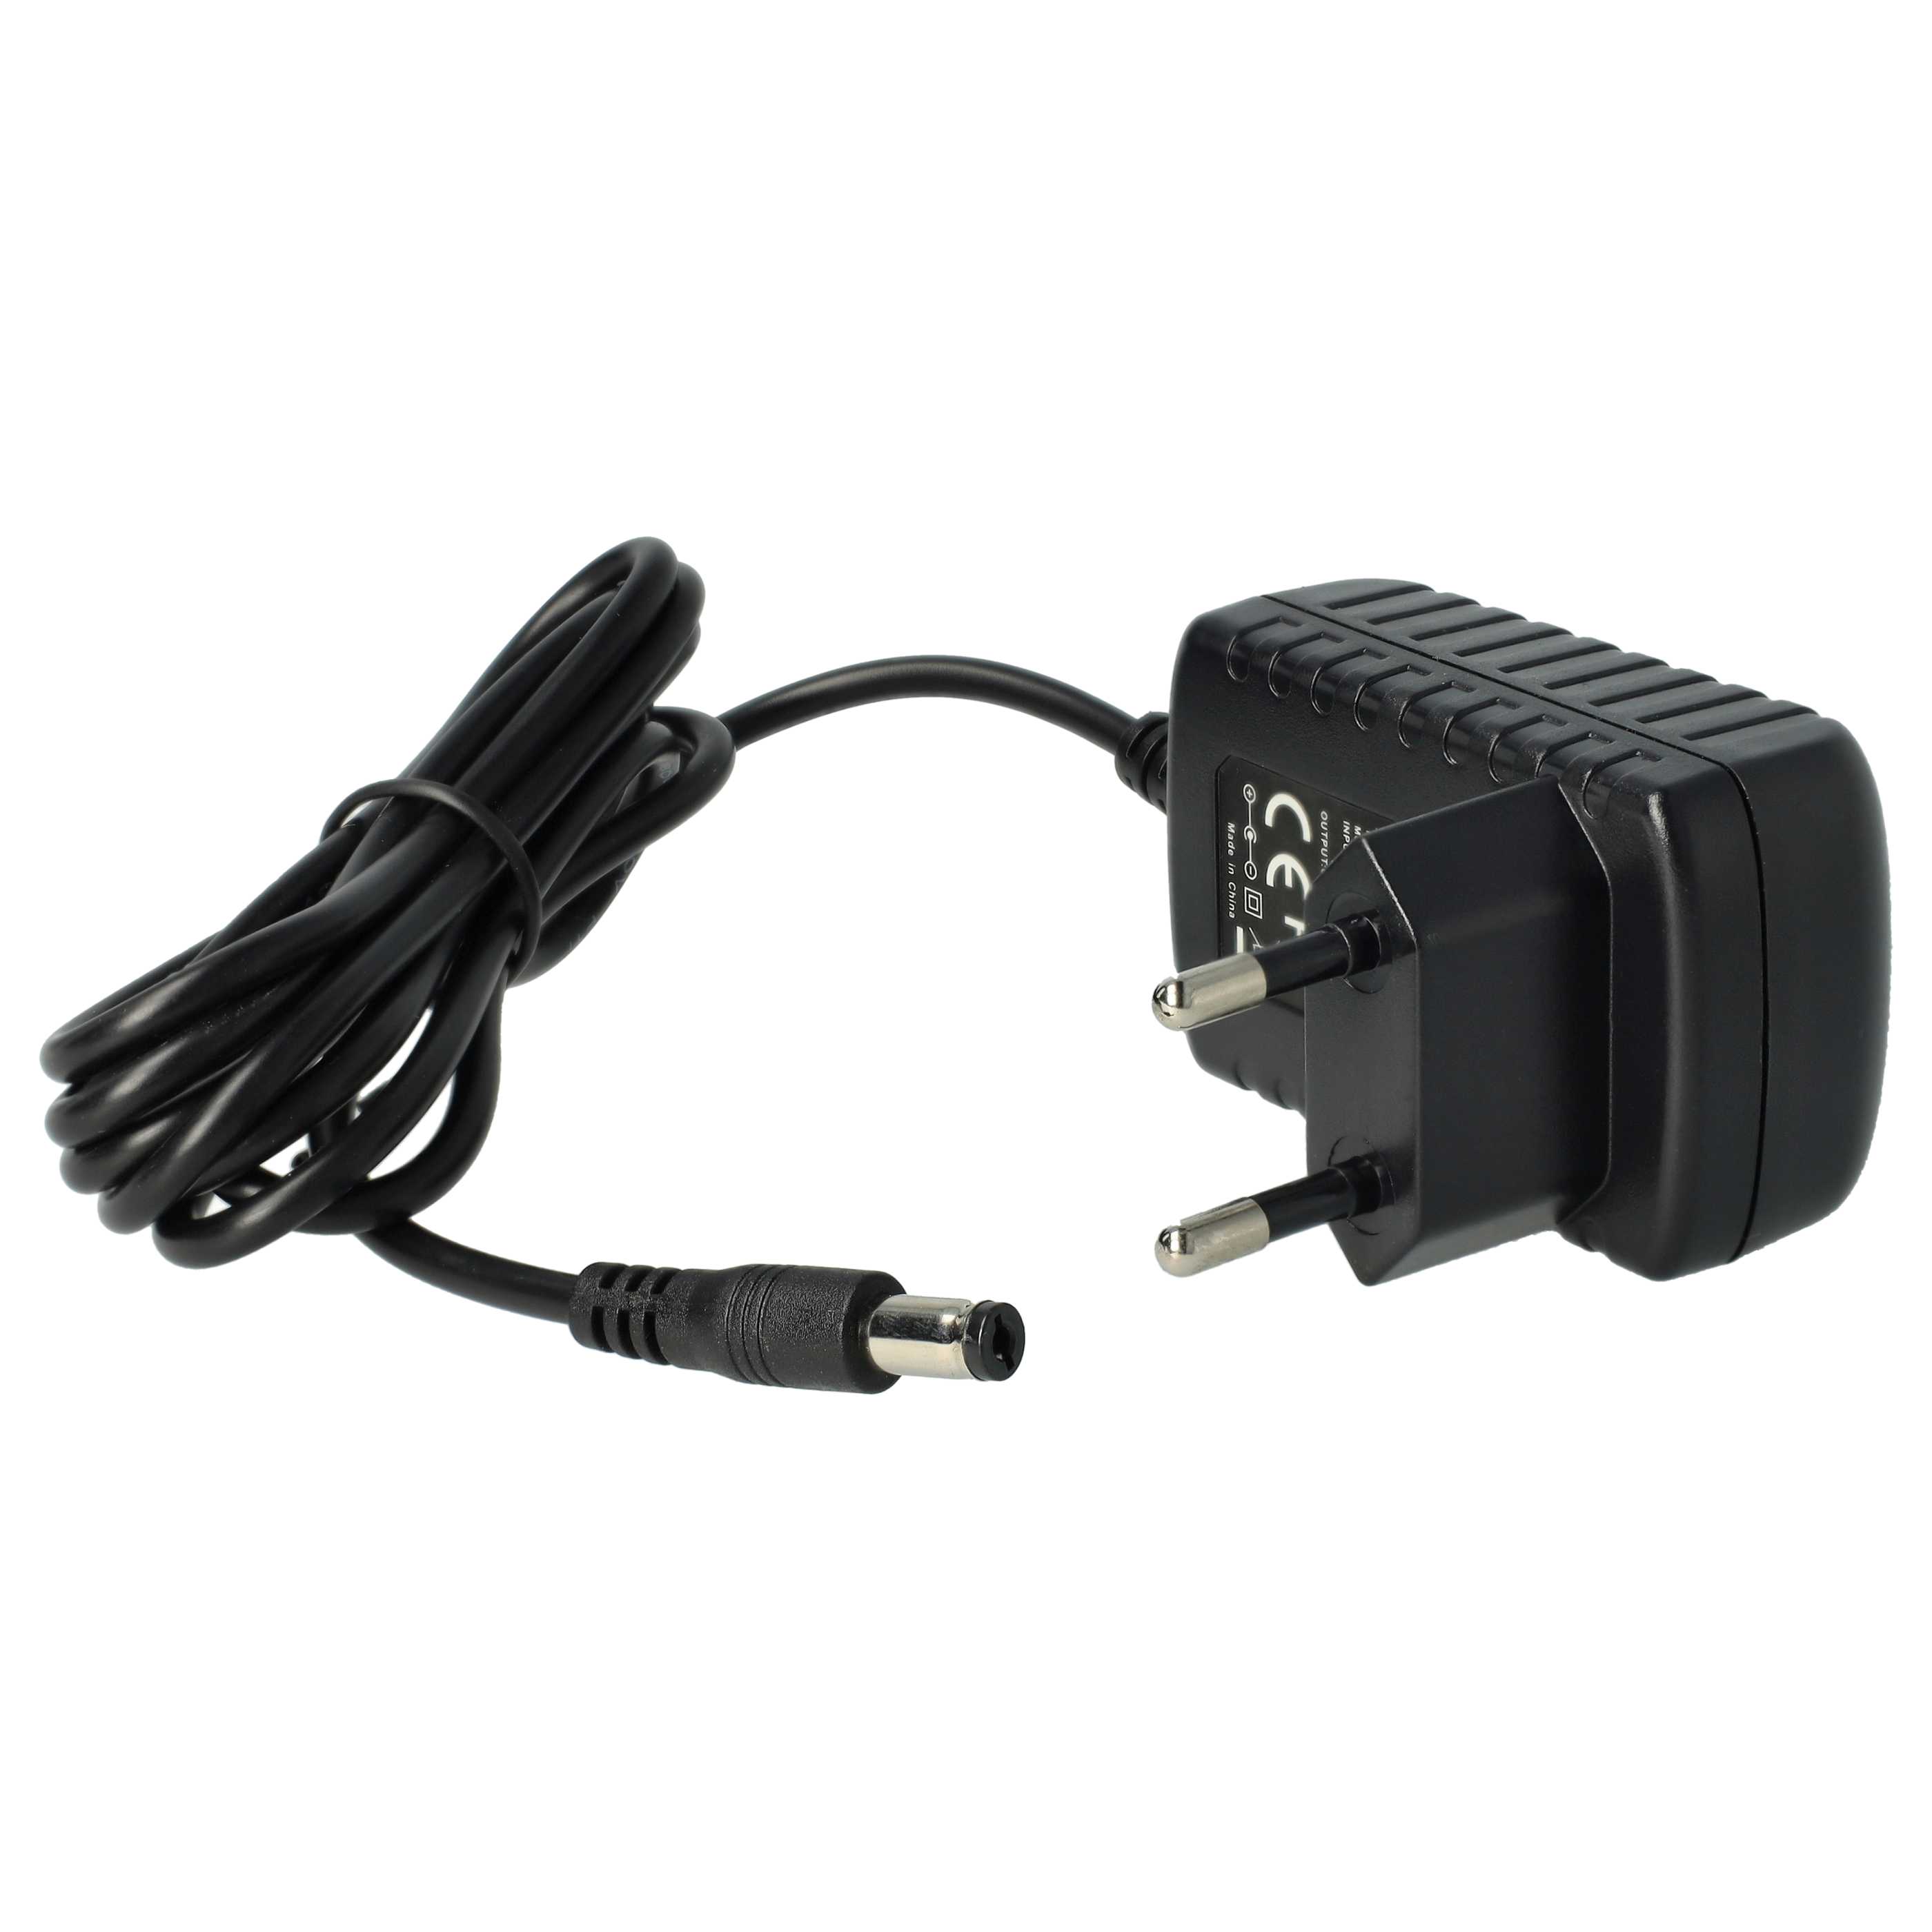 Power Adapter replaces Hartmann 8194047/01, 900 153 for HartmannBlood Pressure Monitor - 200 cm